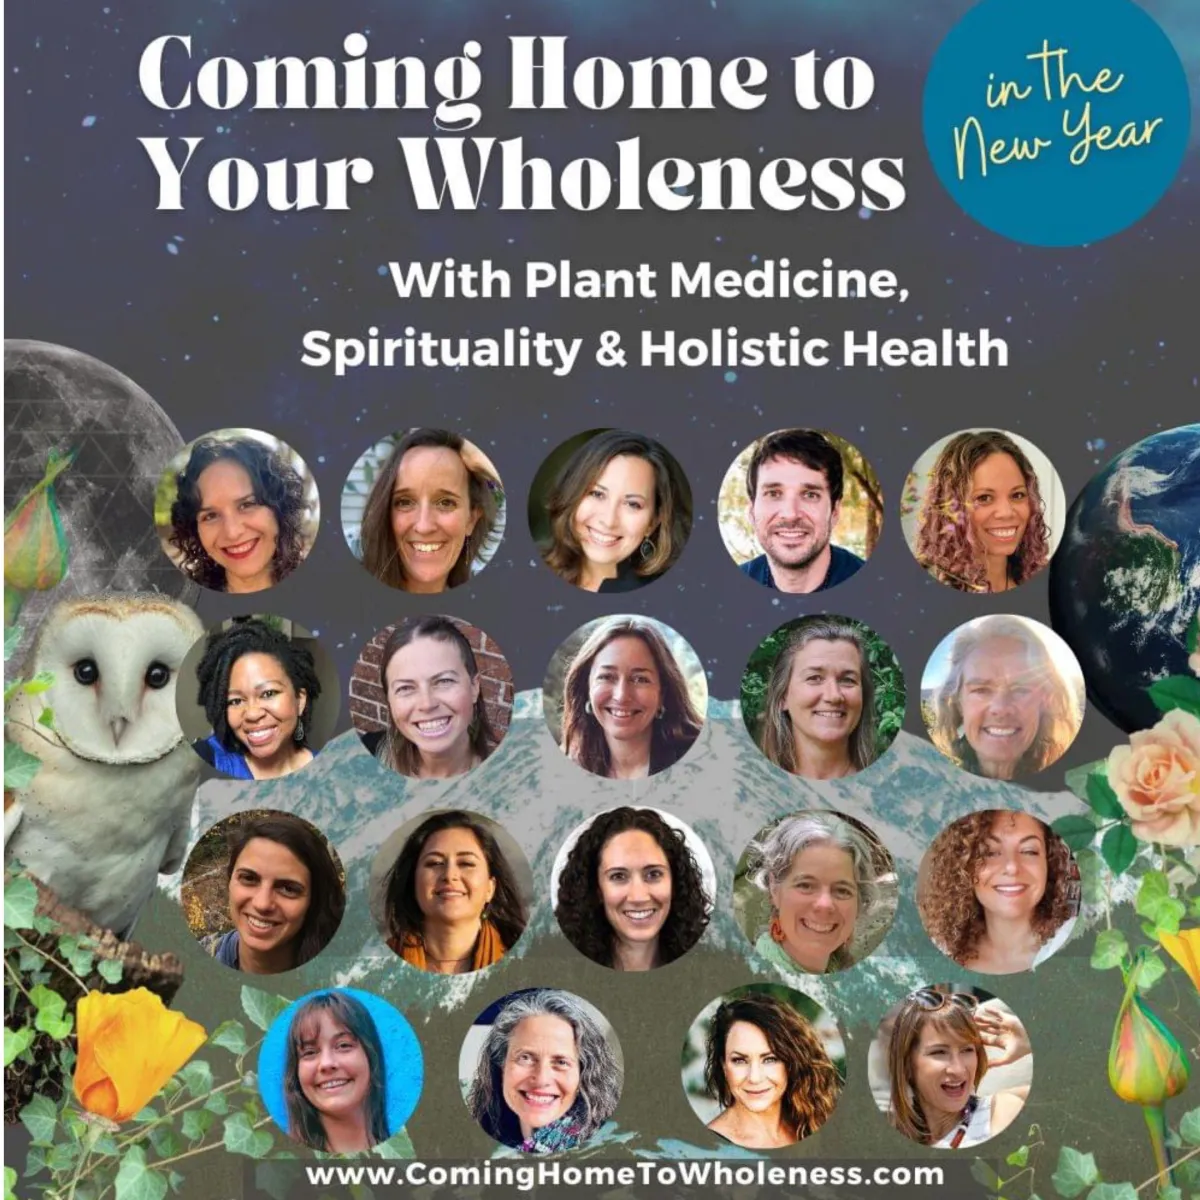 coming home to your wholeness, speakers, plant medicine, spirituality & hlistic Healh